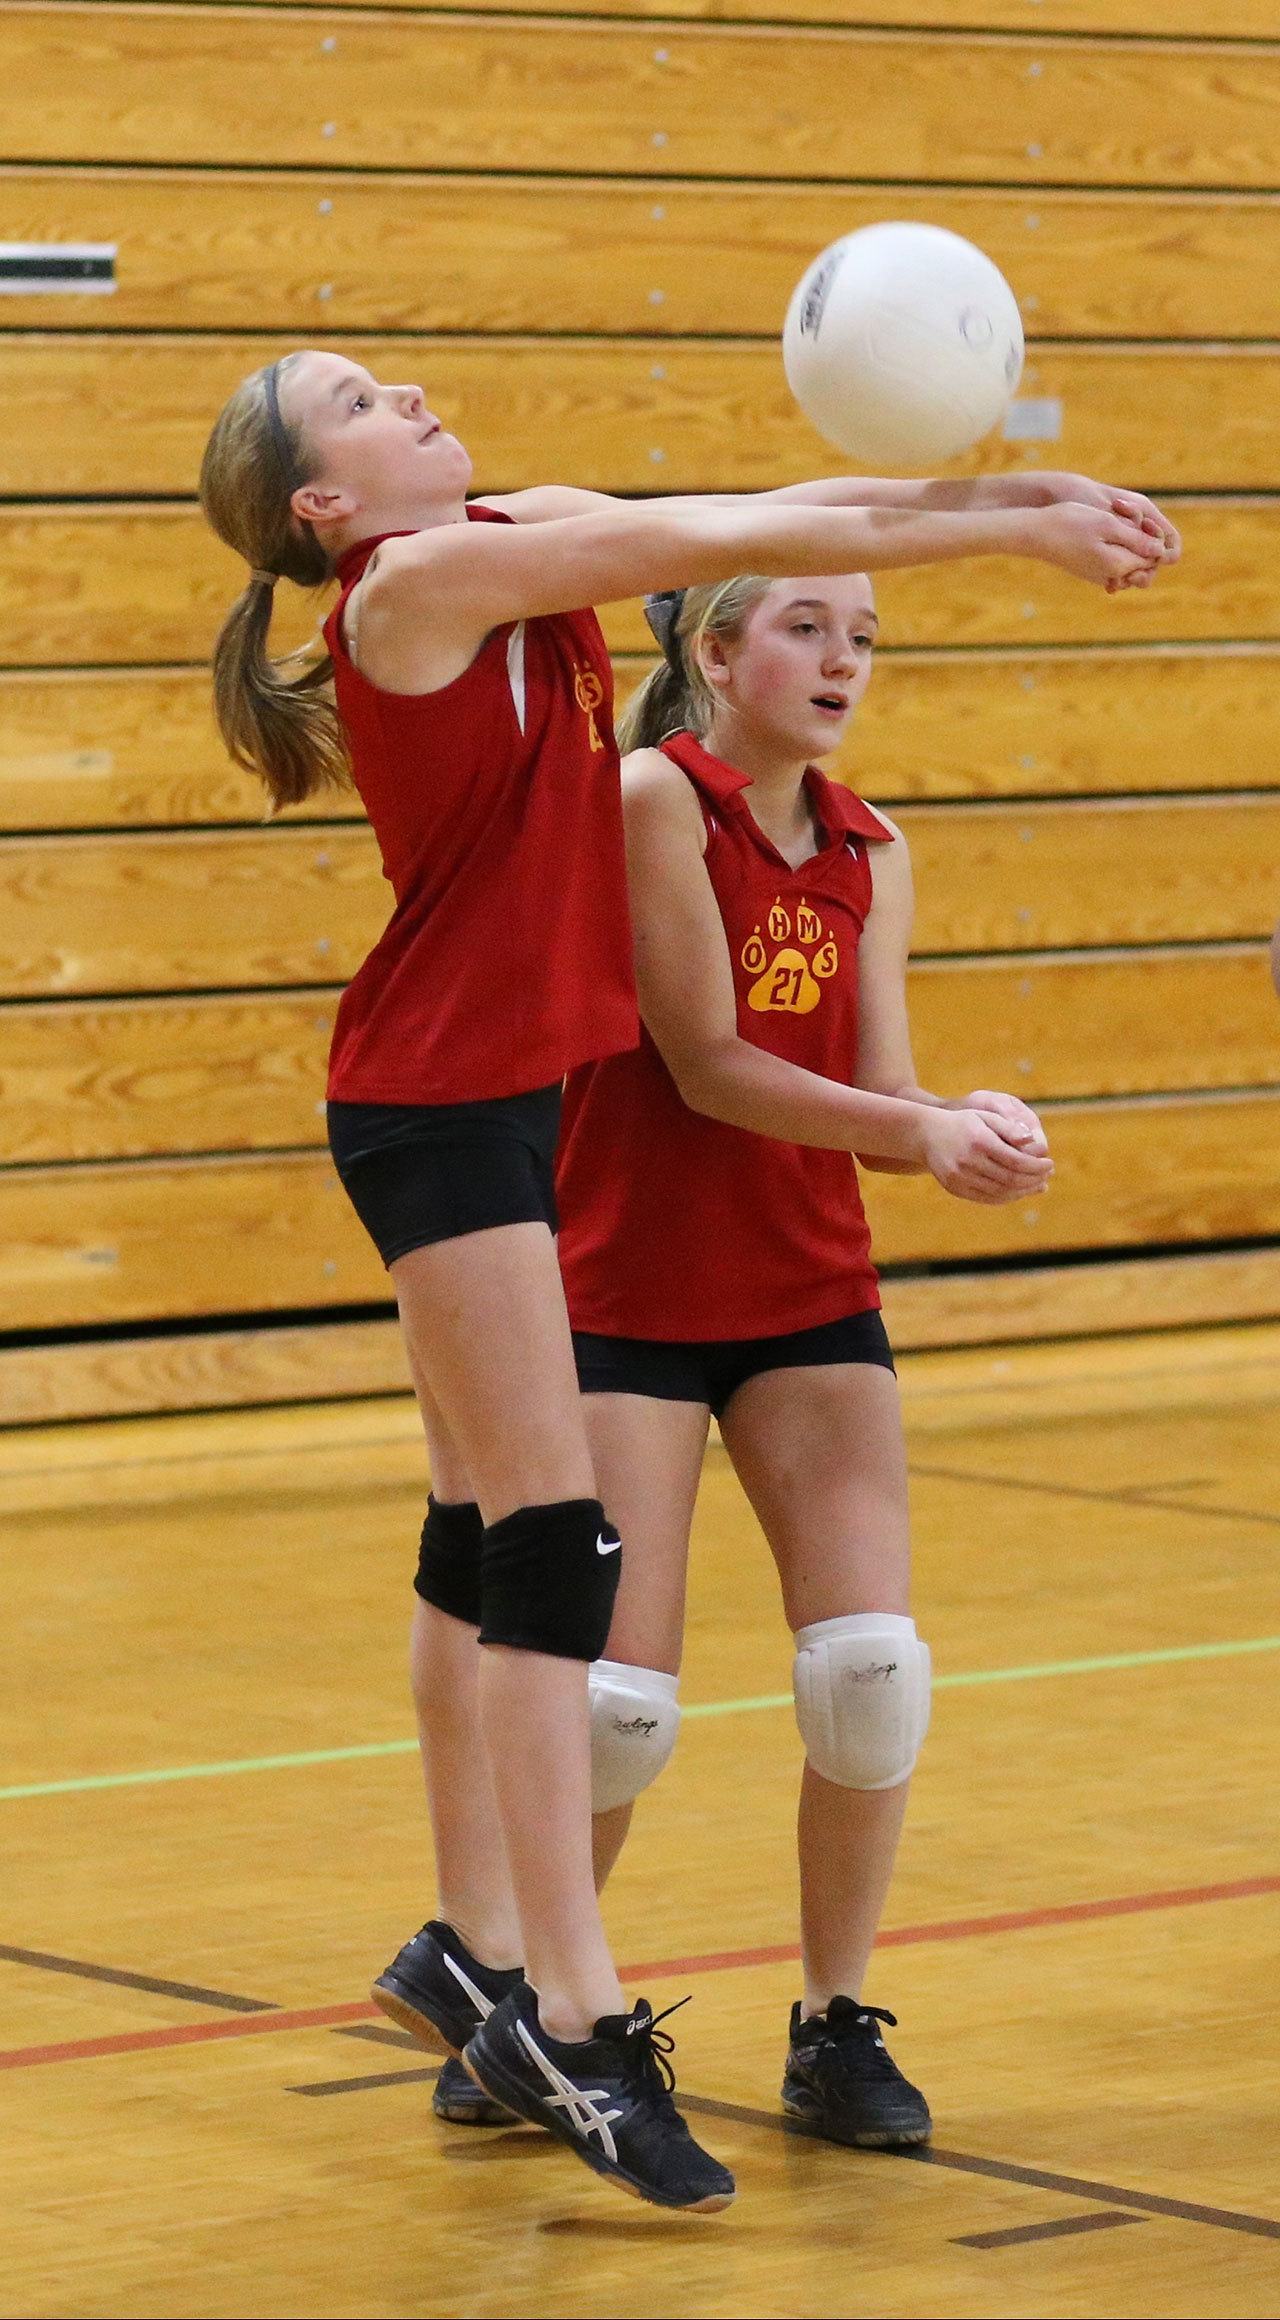 Panthers, Cougars square off / Middle school volleyball | Whidbey News ...